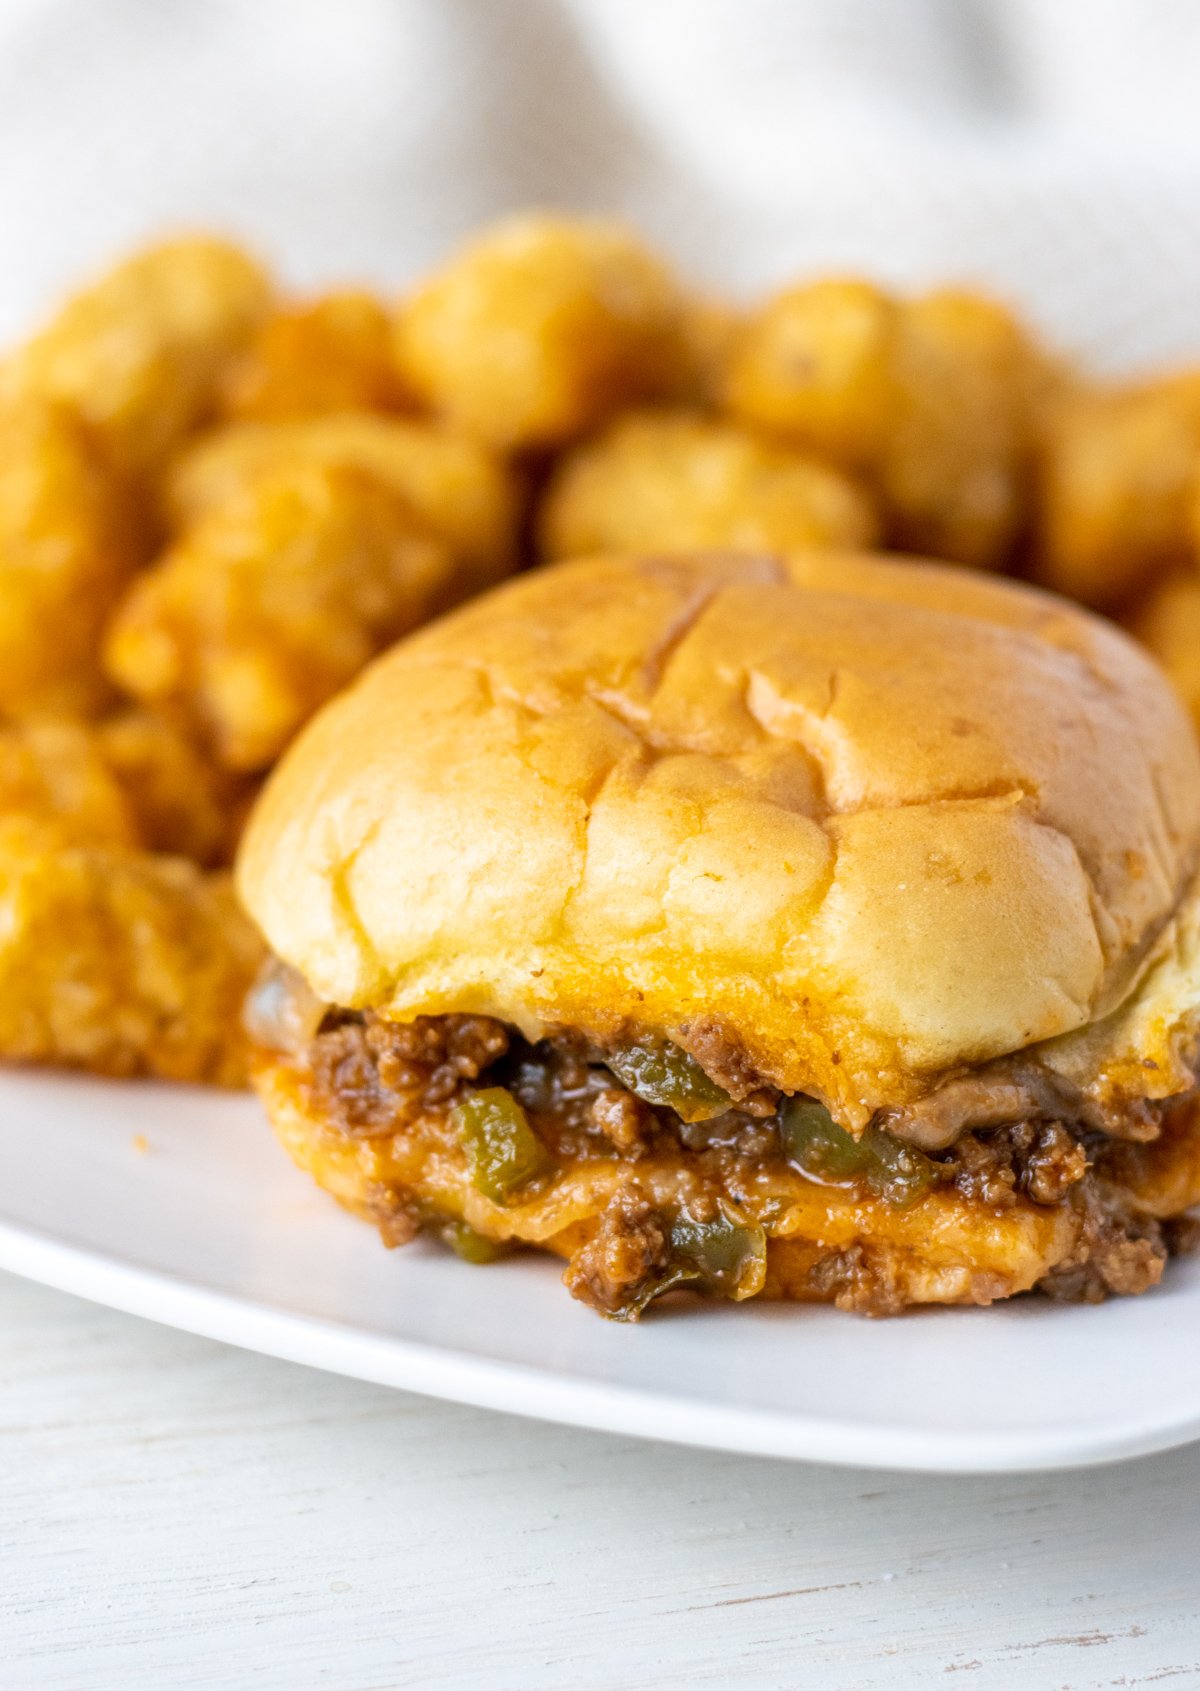 Sloppy joe slider on a plate with tater tots.